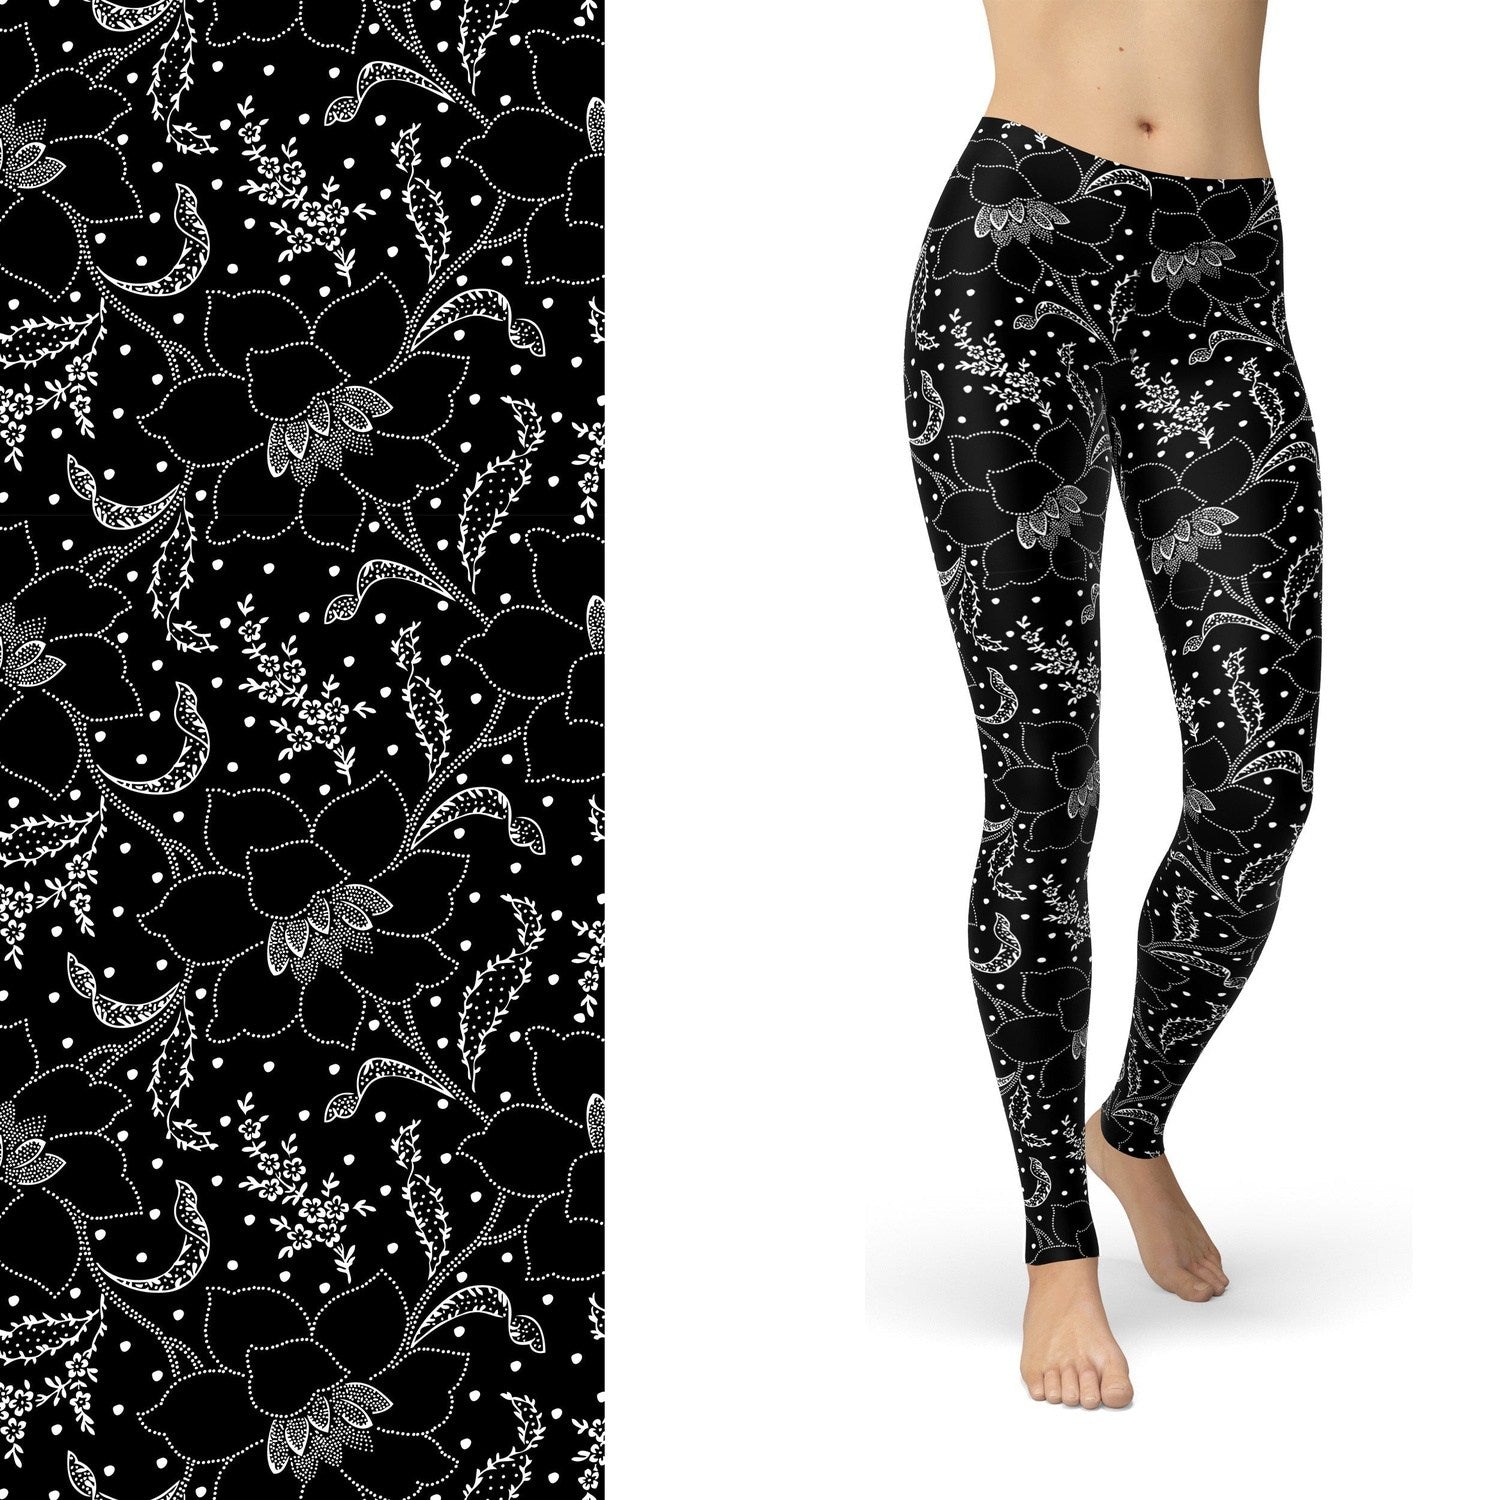 Dotted Flowers in Black and White Full Length leggings with Pockets